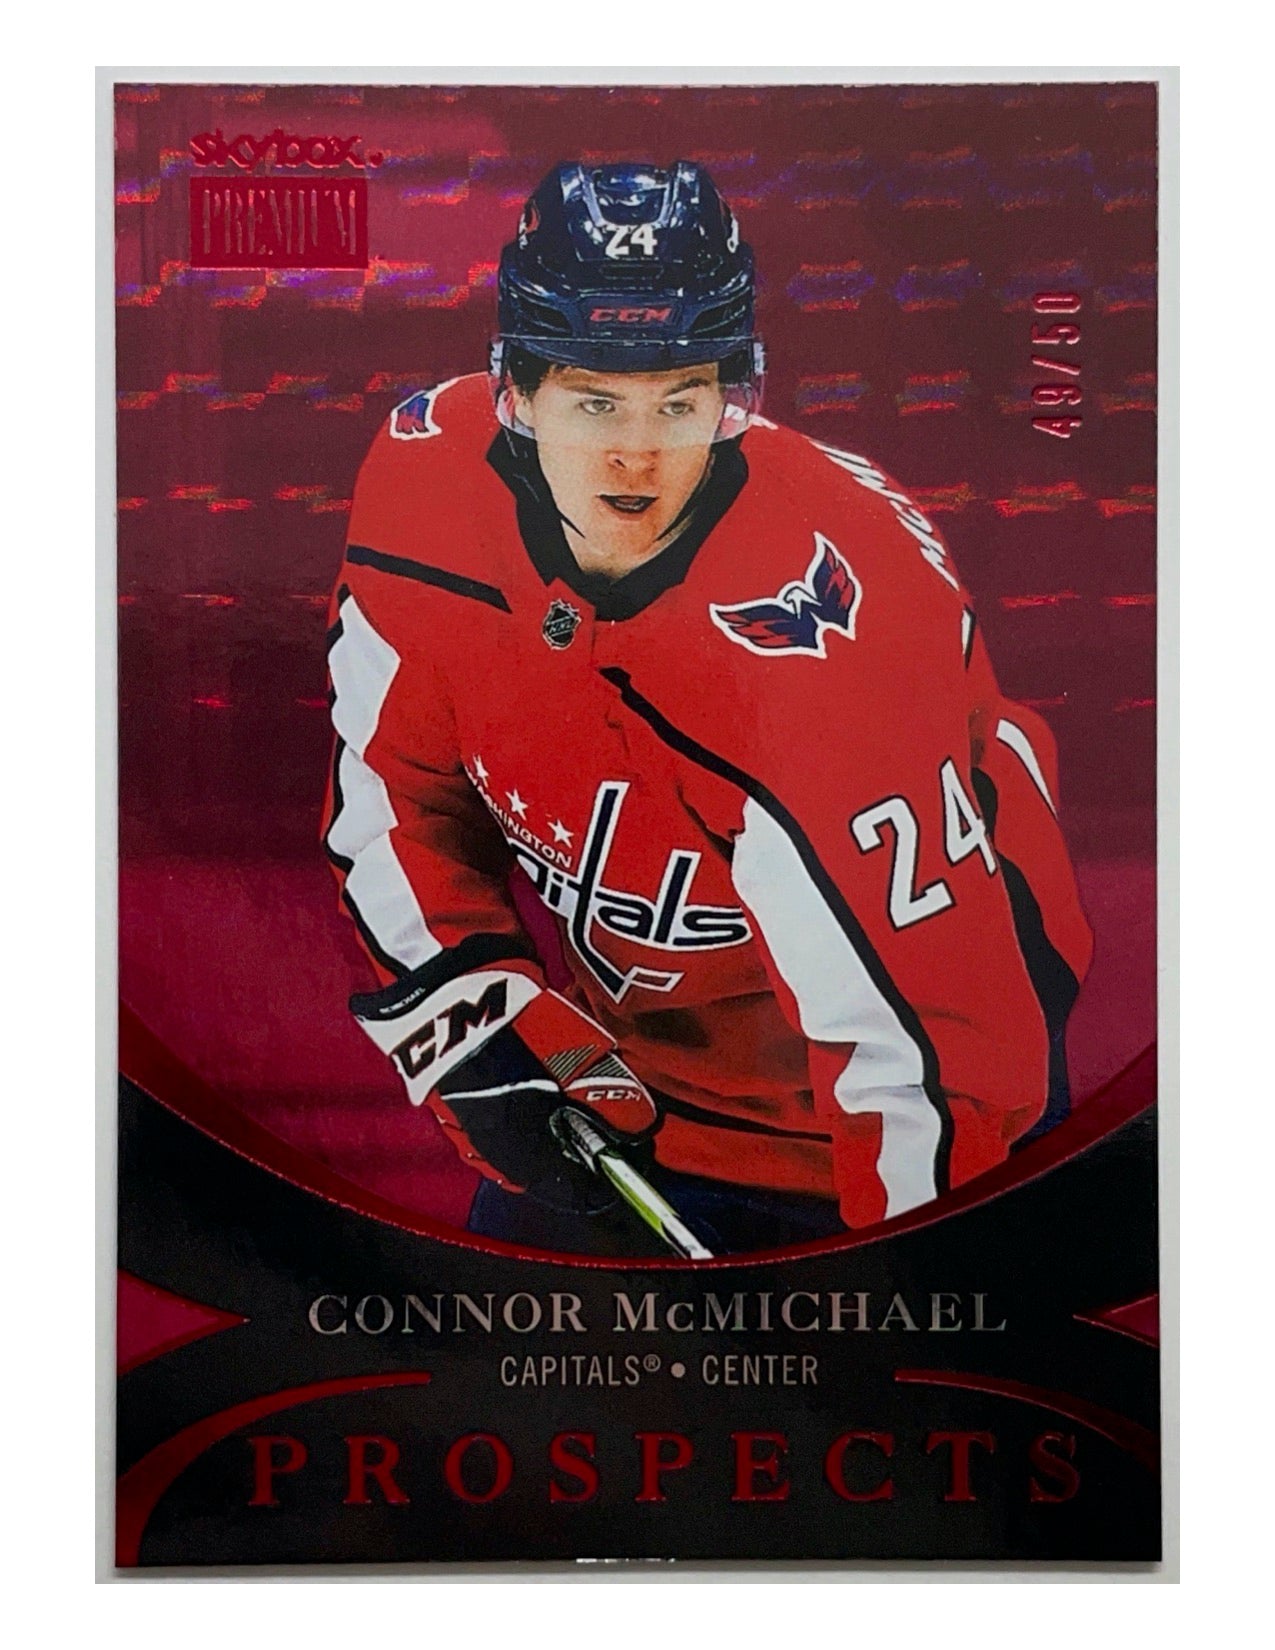 Connor McMichael 2020-21 Upper Deck Skybox Metal Universe Prospects Star Rubies #PP-43 - 49/50